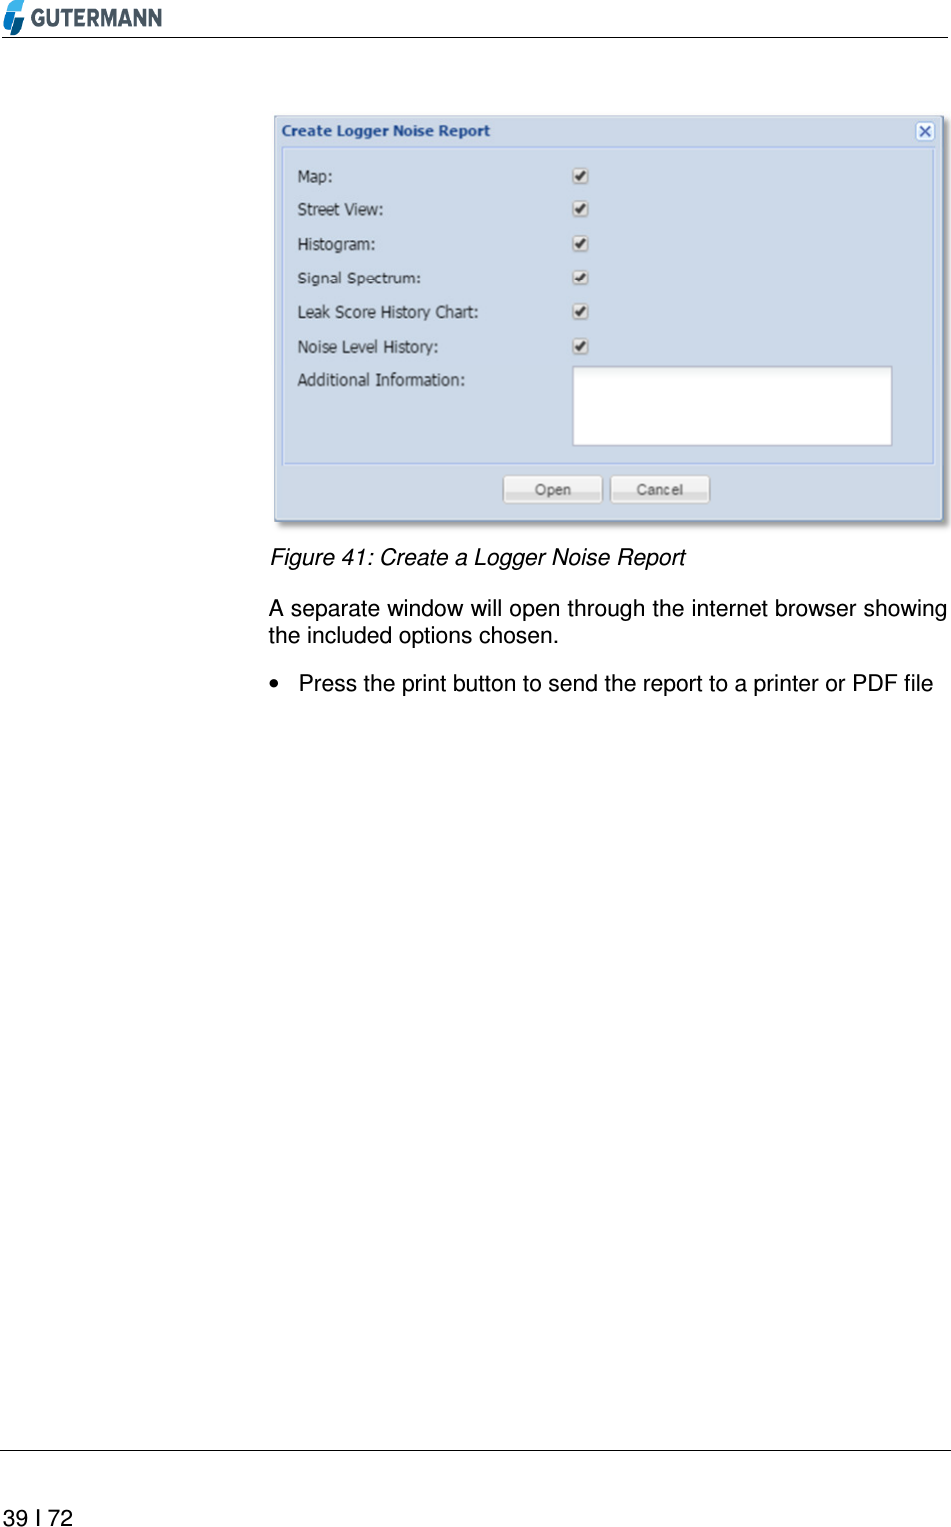       39 I 72    Figure 41: Create a Logger Noise Report A separate window will open through the internet browser showing the included options chosen.  •  Press the print button to send the report to a printer or PDF file  